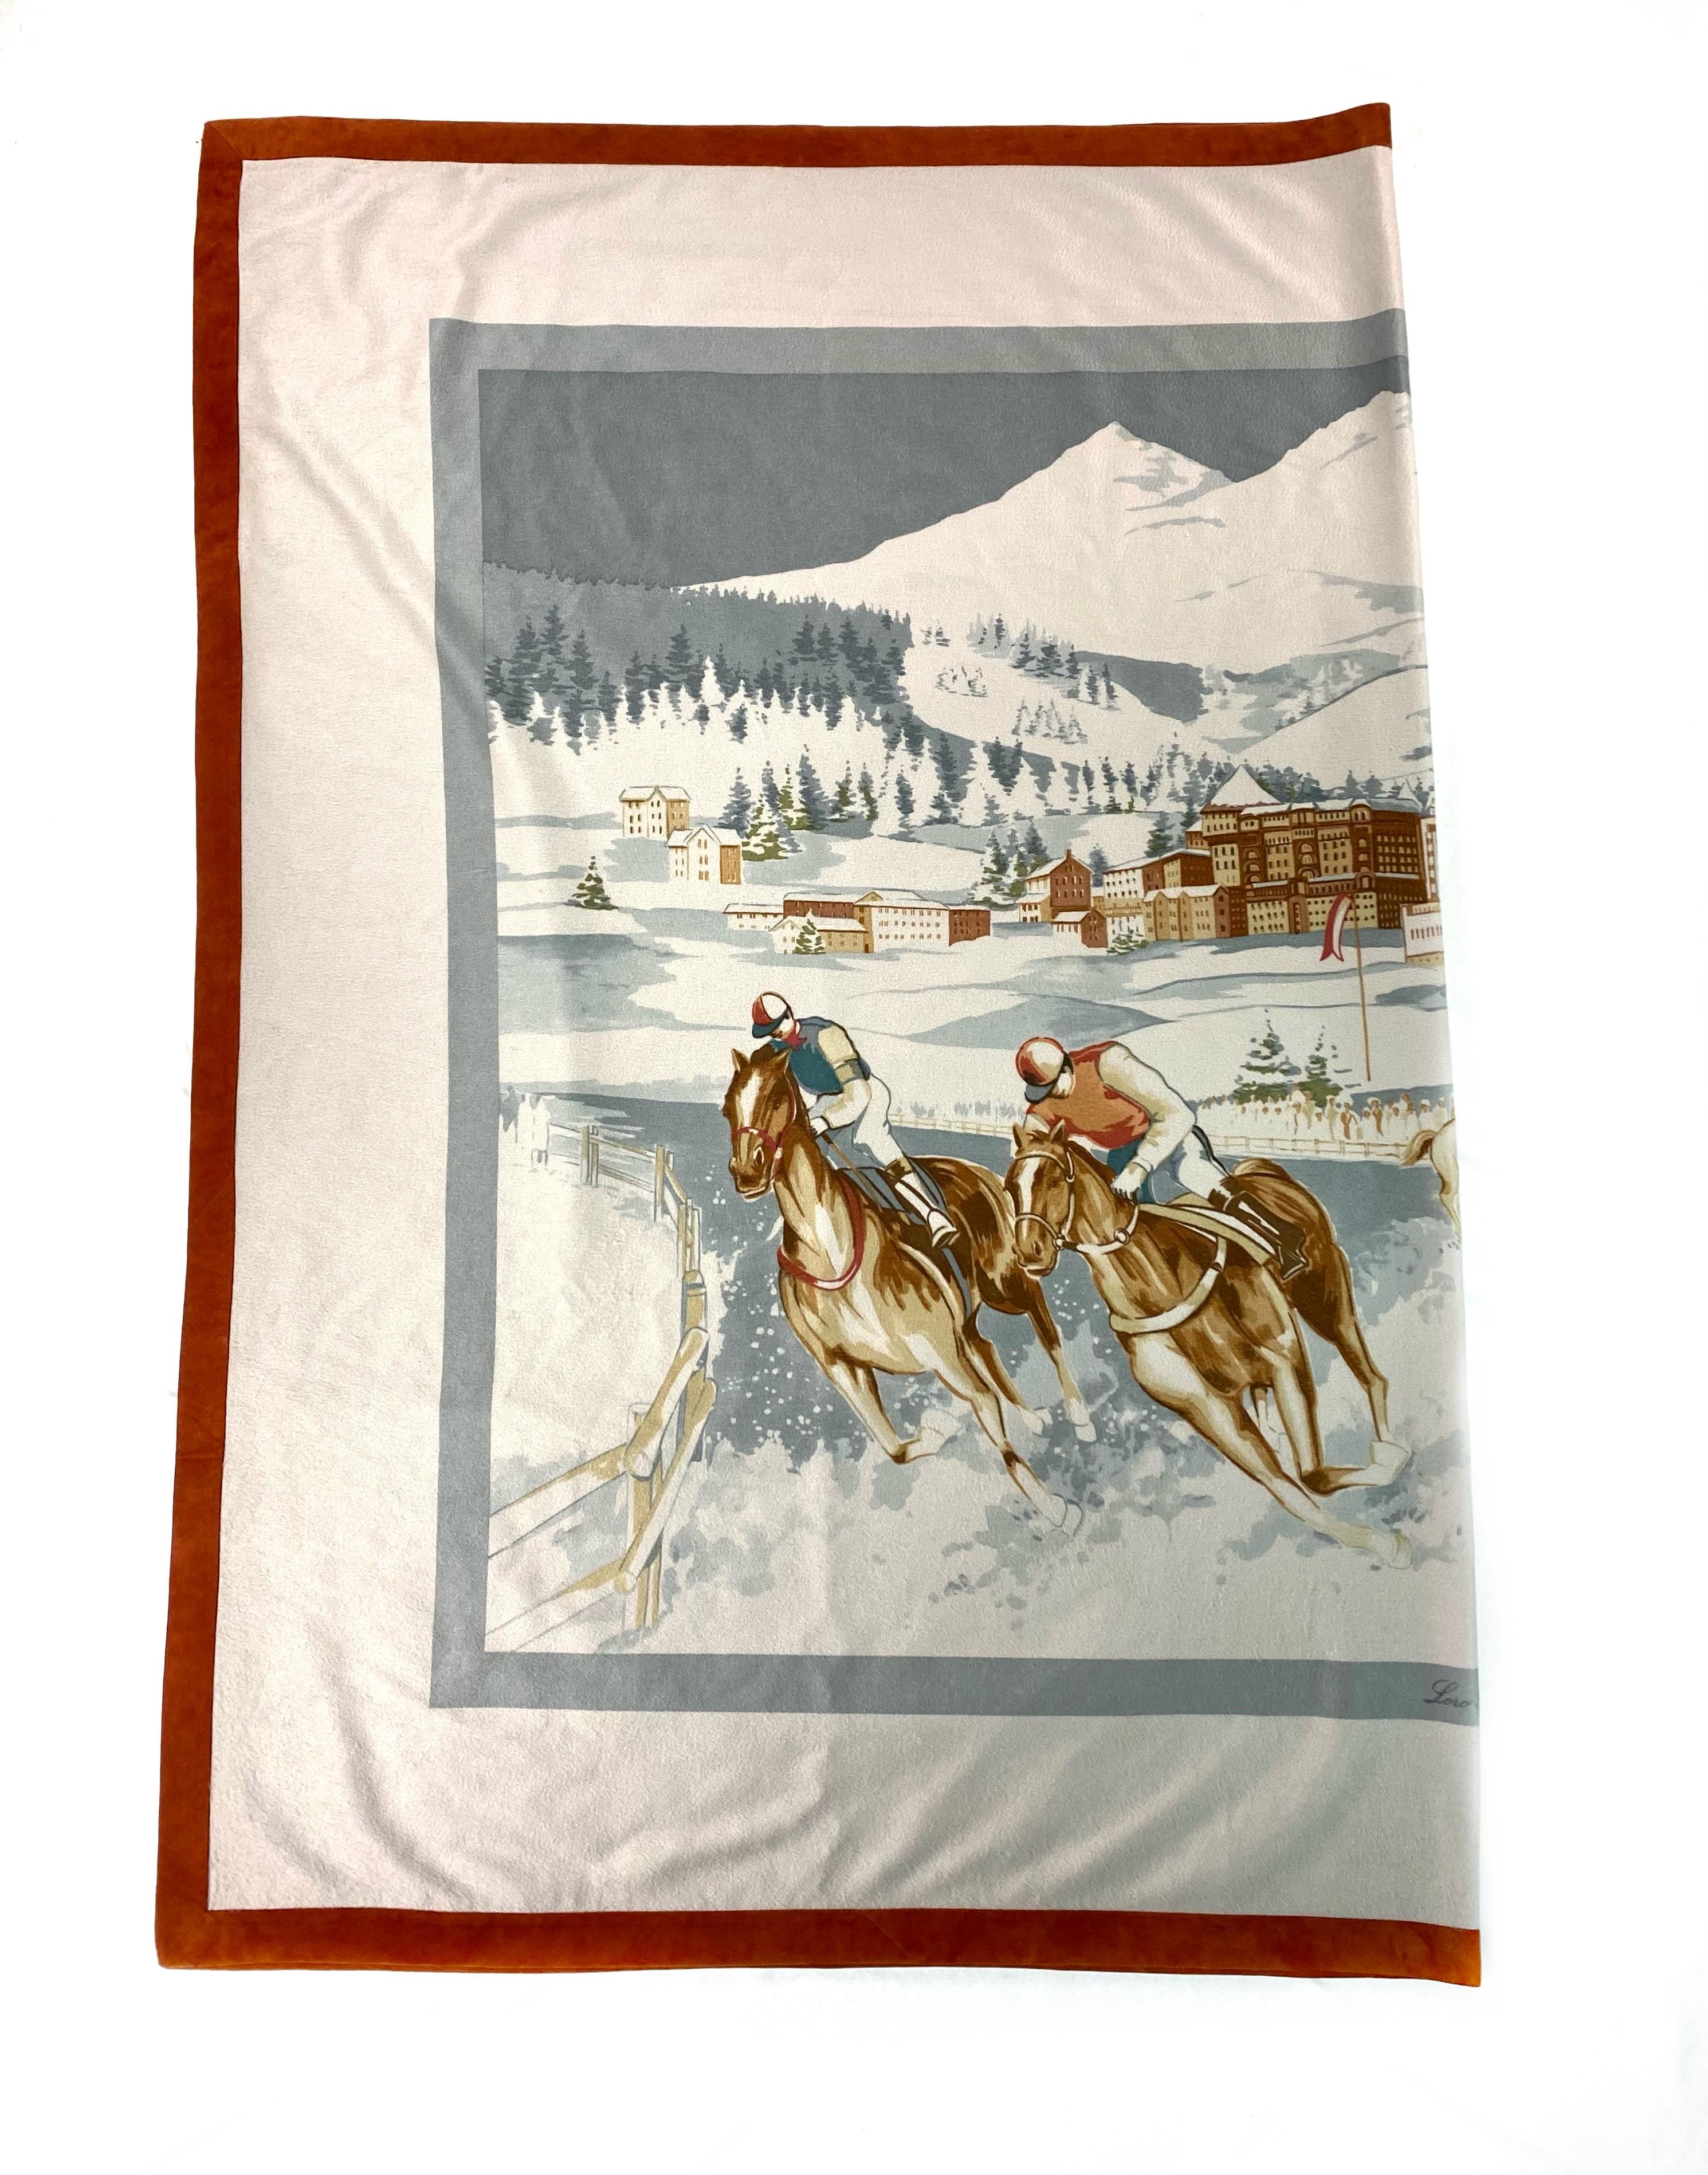 Product details:

The throw features grey 100% cashmere and brown 100% dyed suede goatskin trimming with polo horse race and snow mountains scenery . Made in Italy.